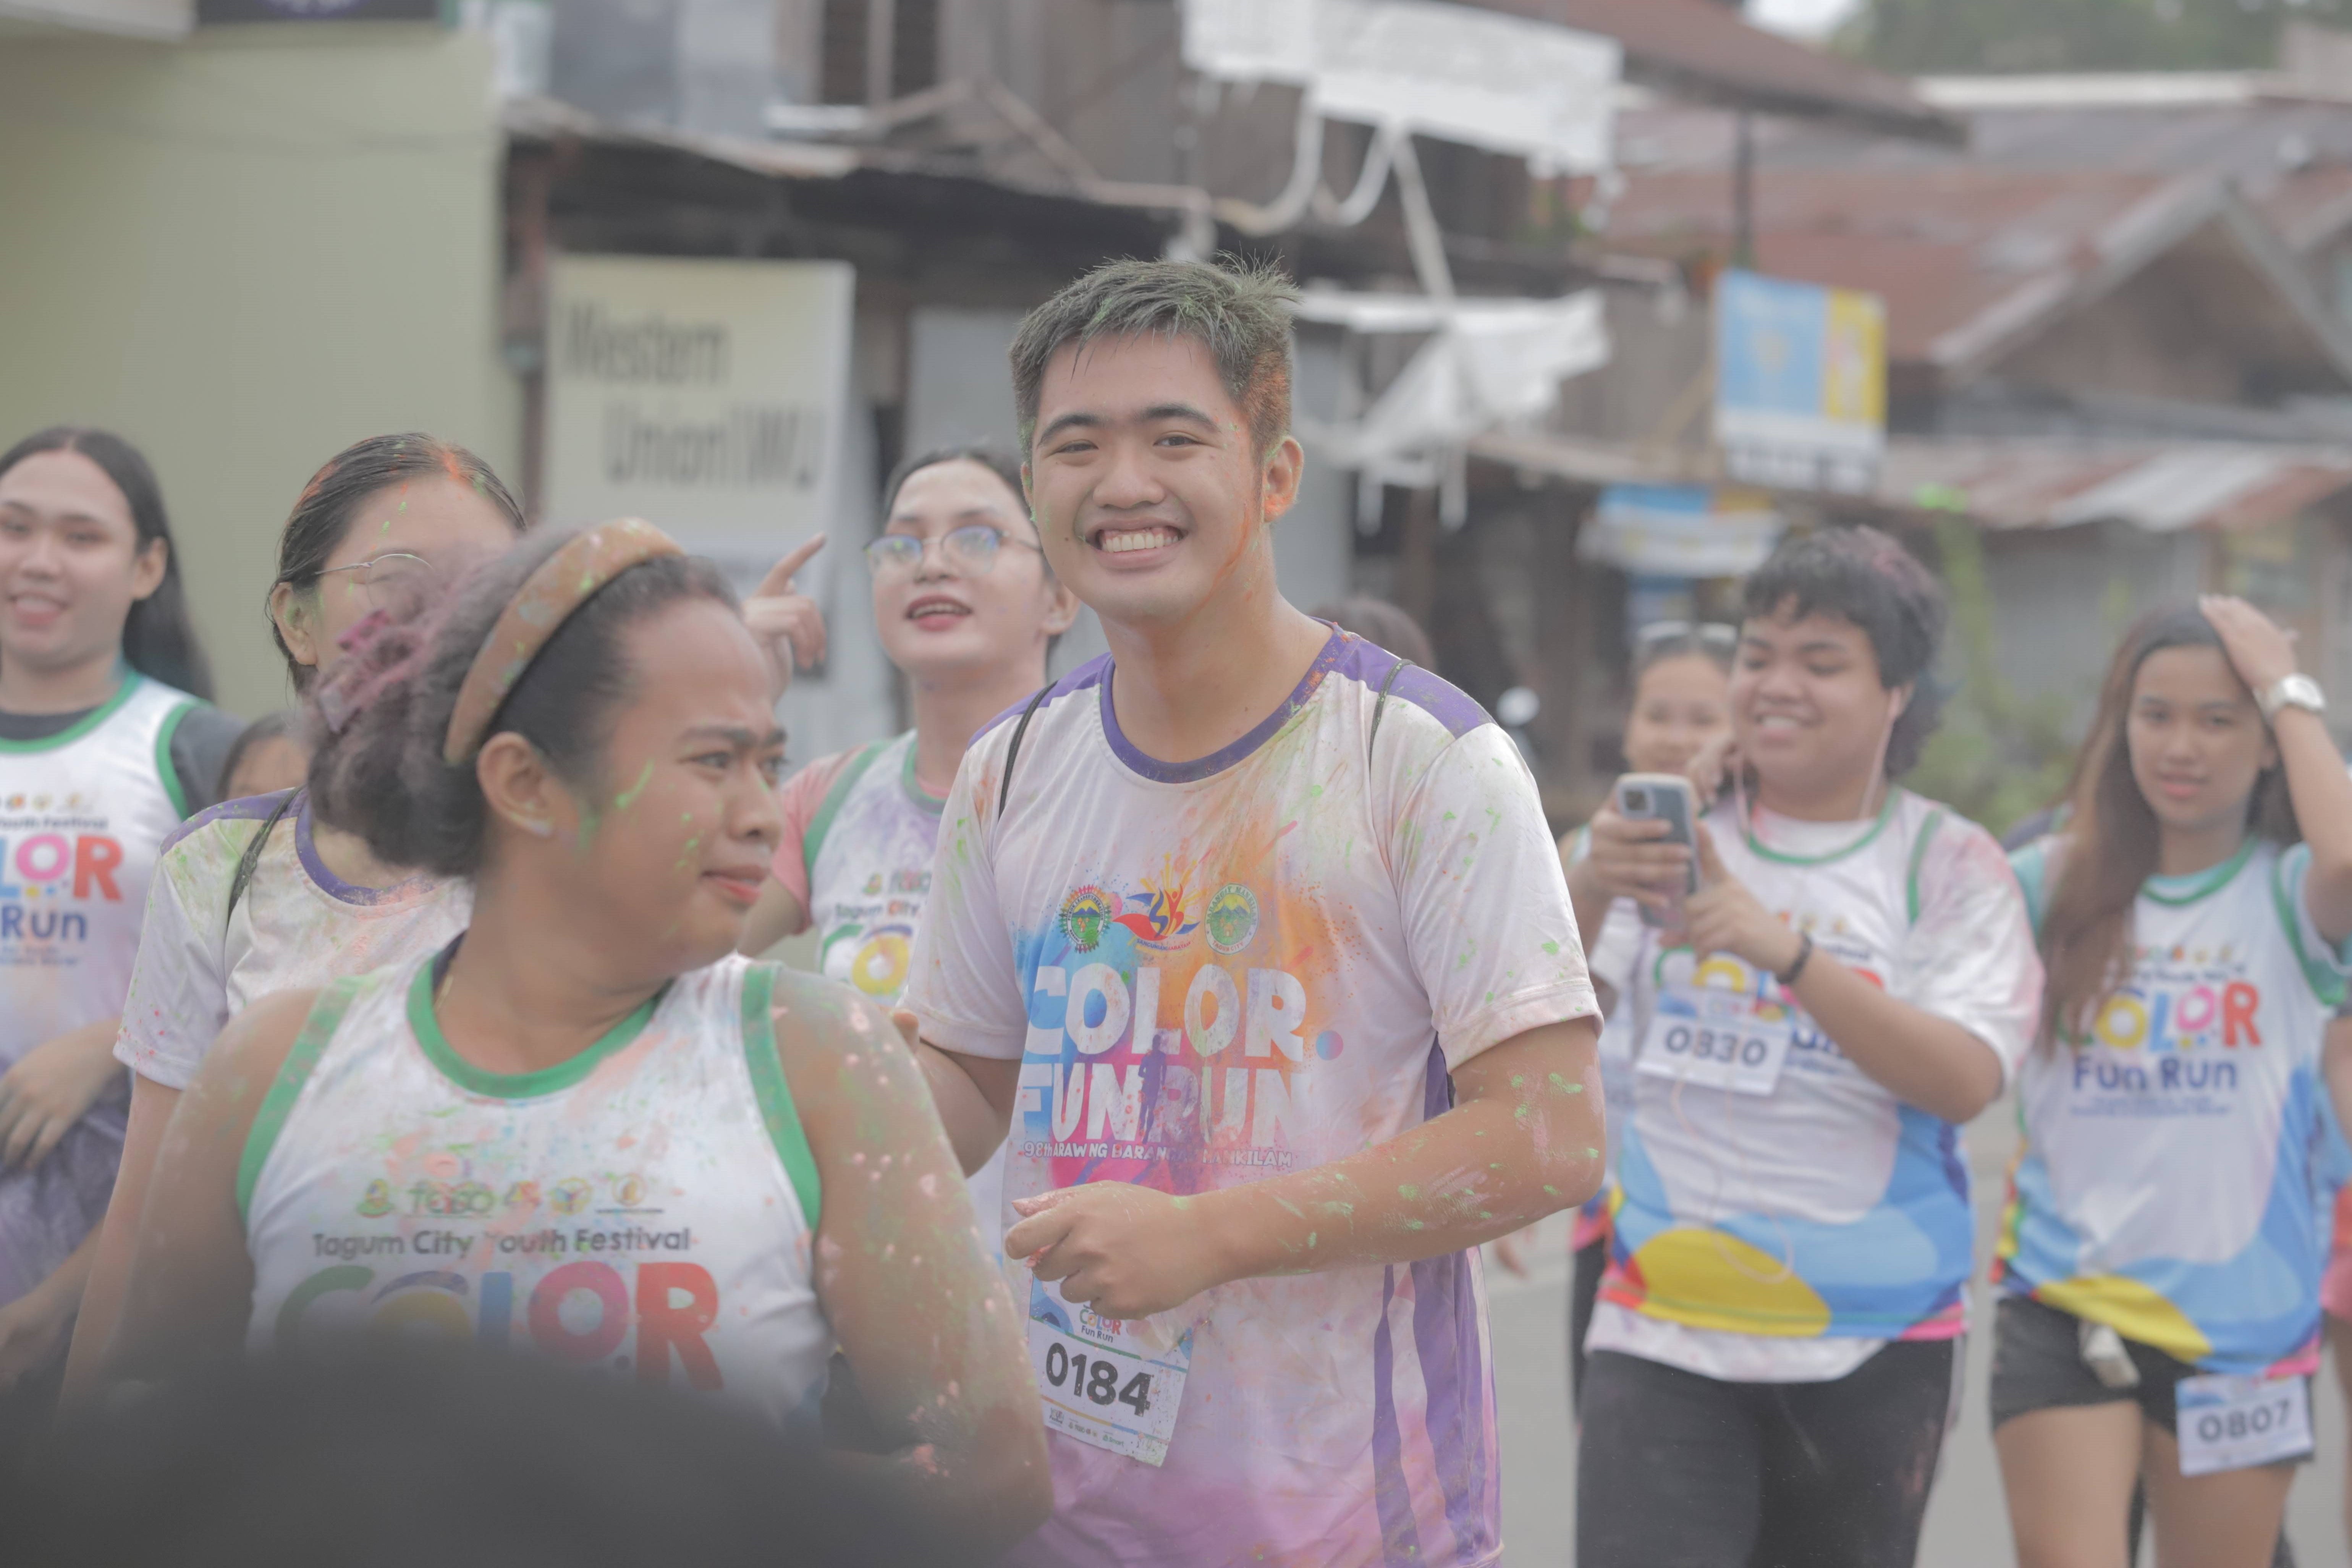 Almost 1,700 Runners Joined The Color Fun Run Of Tagum’s Youth Festival 2023